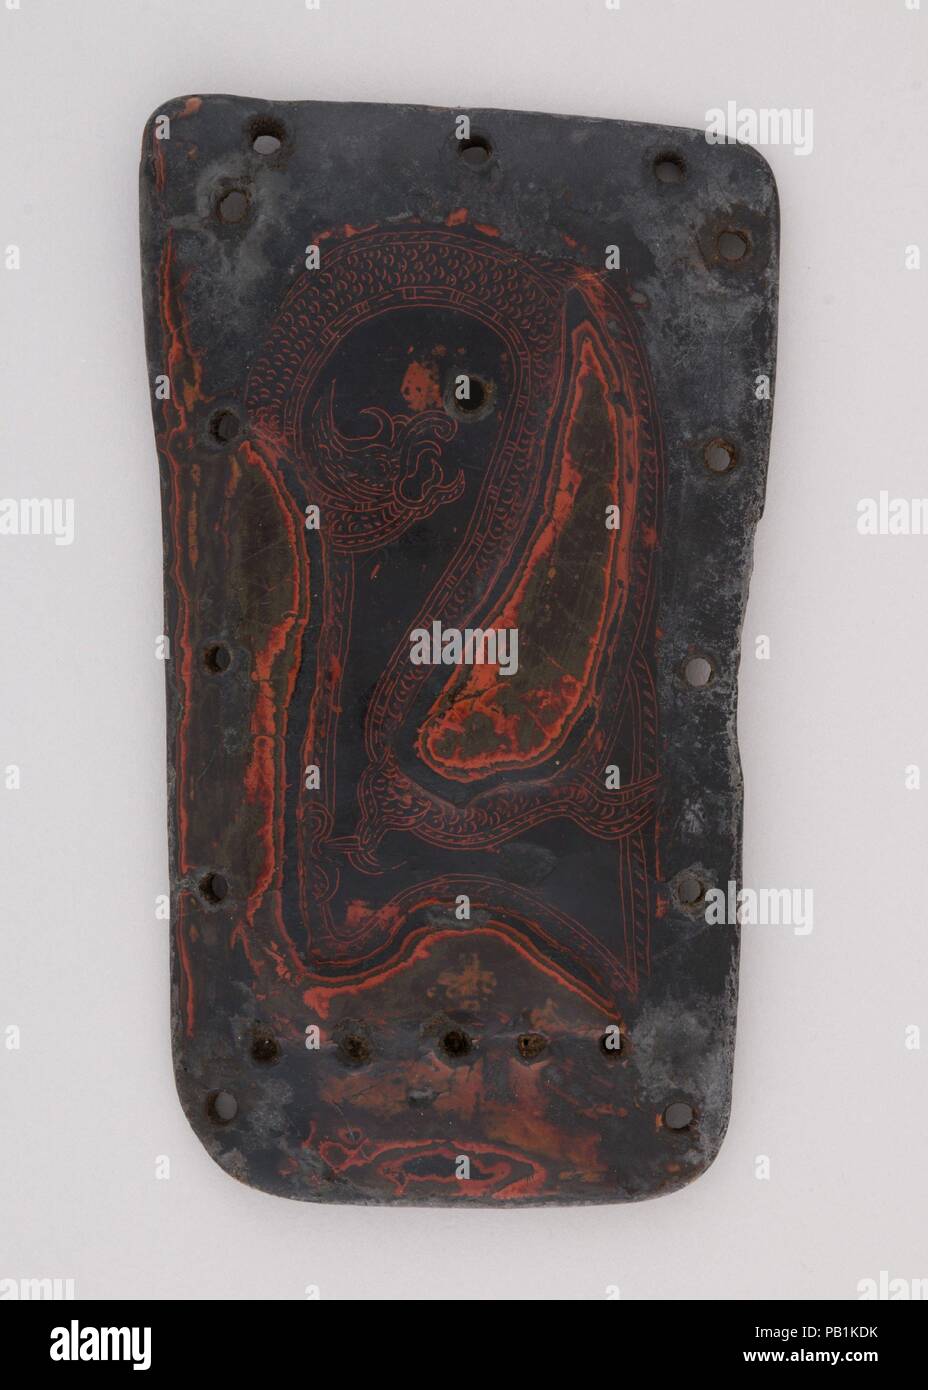 Element from a Lacquered Leather Cuirass. Culture: Yi or Nuosu, China (Yunnan or Sichuan). Dimensions: L. 7 3/4 in. (19.7 cm); W. 4 1/2 in. (11.4 cm). Date: 8th-10th century. Museum: Metropolitan Museum of Art, New York, USA. Stock Photo